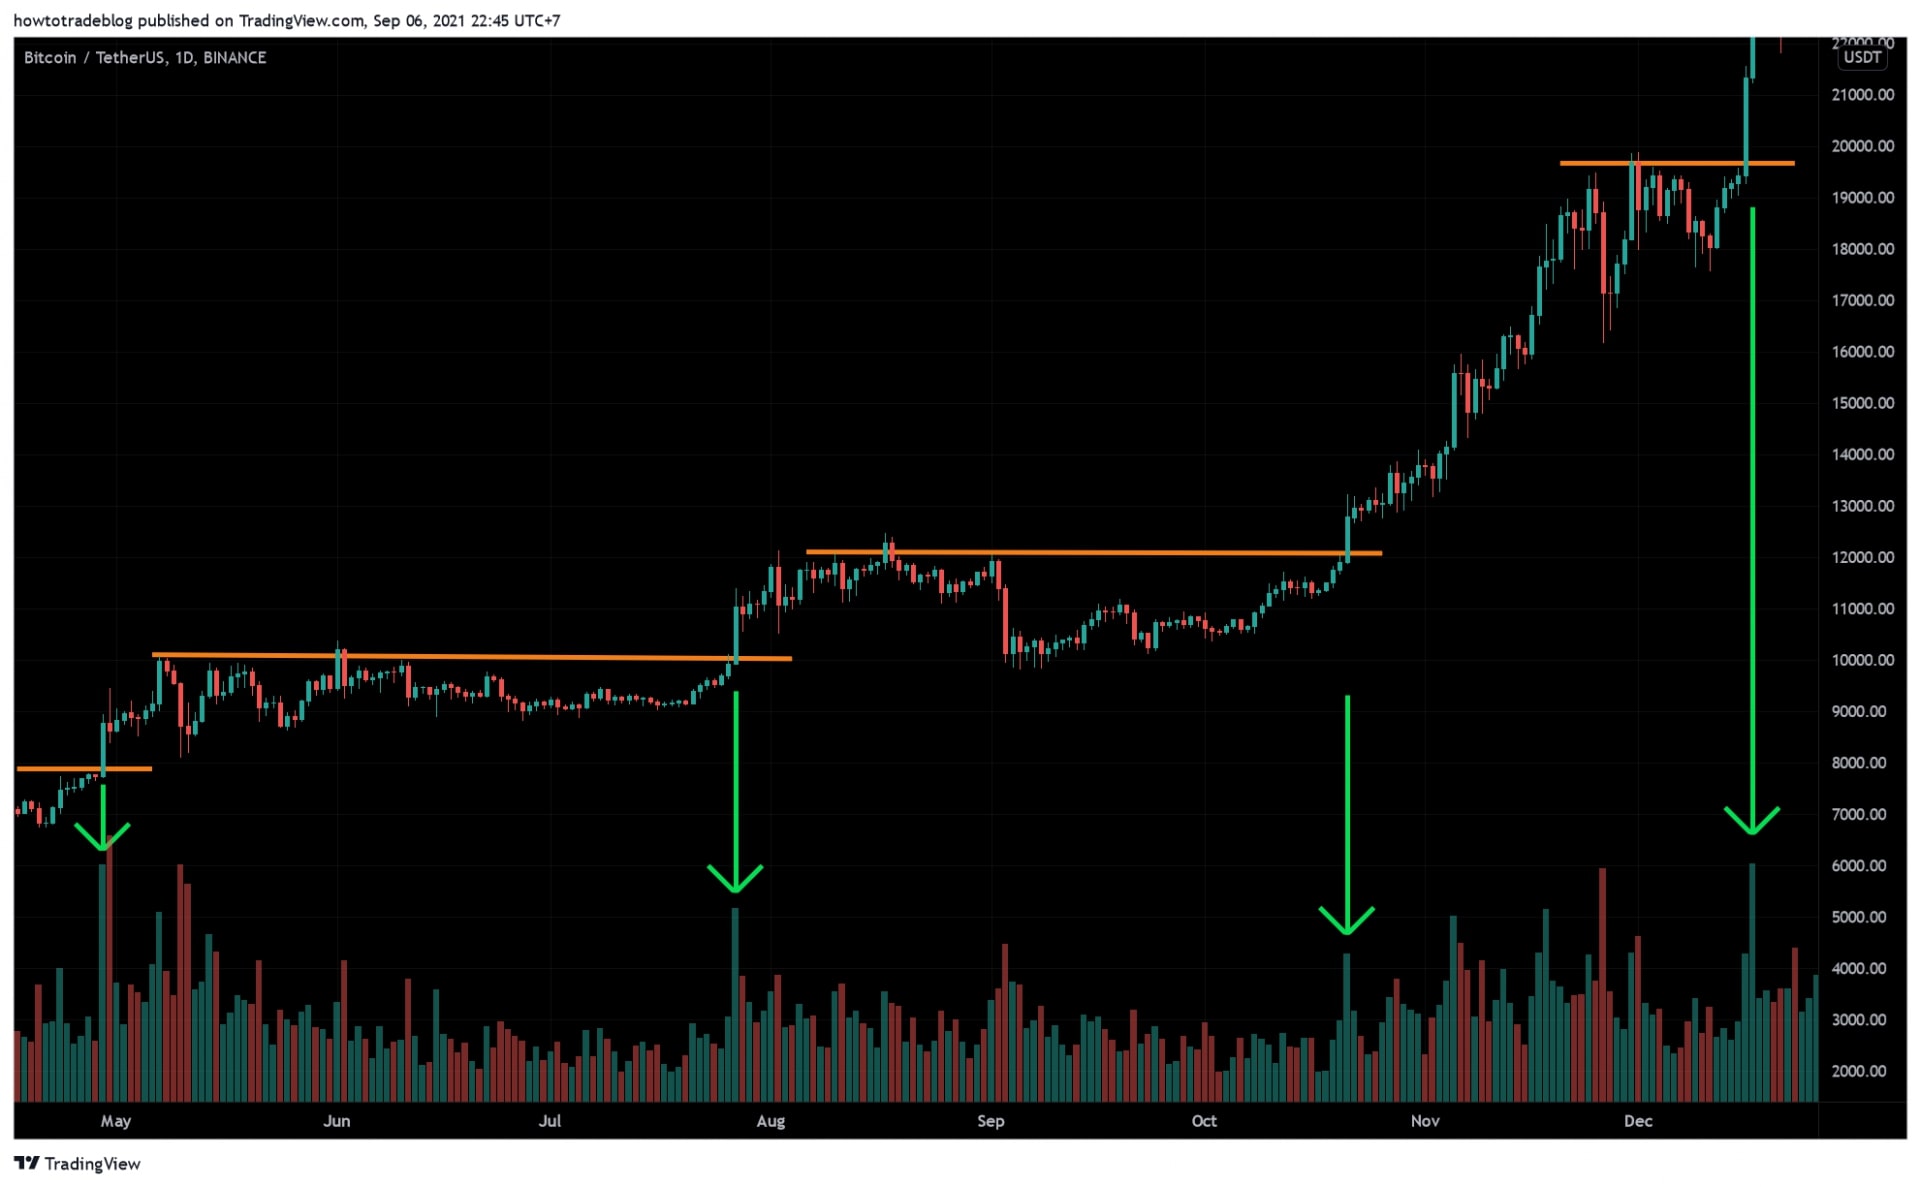 Trend must be confirmed with volume